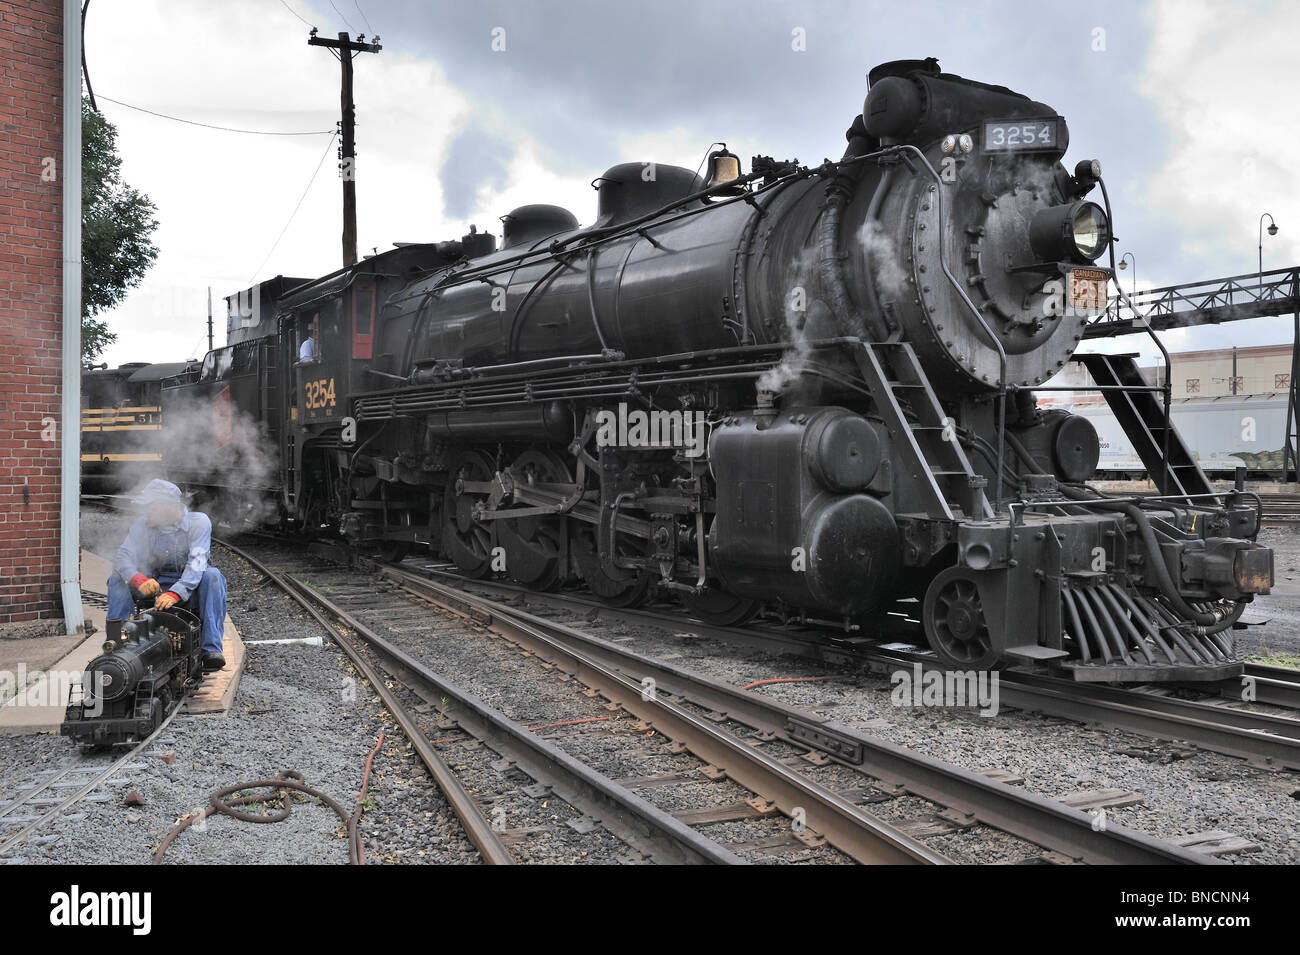 Small train and the Canadian National #3254, Steamtown National Historic Site, Scranton, PA 100710 35593 Stock Photo